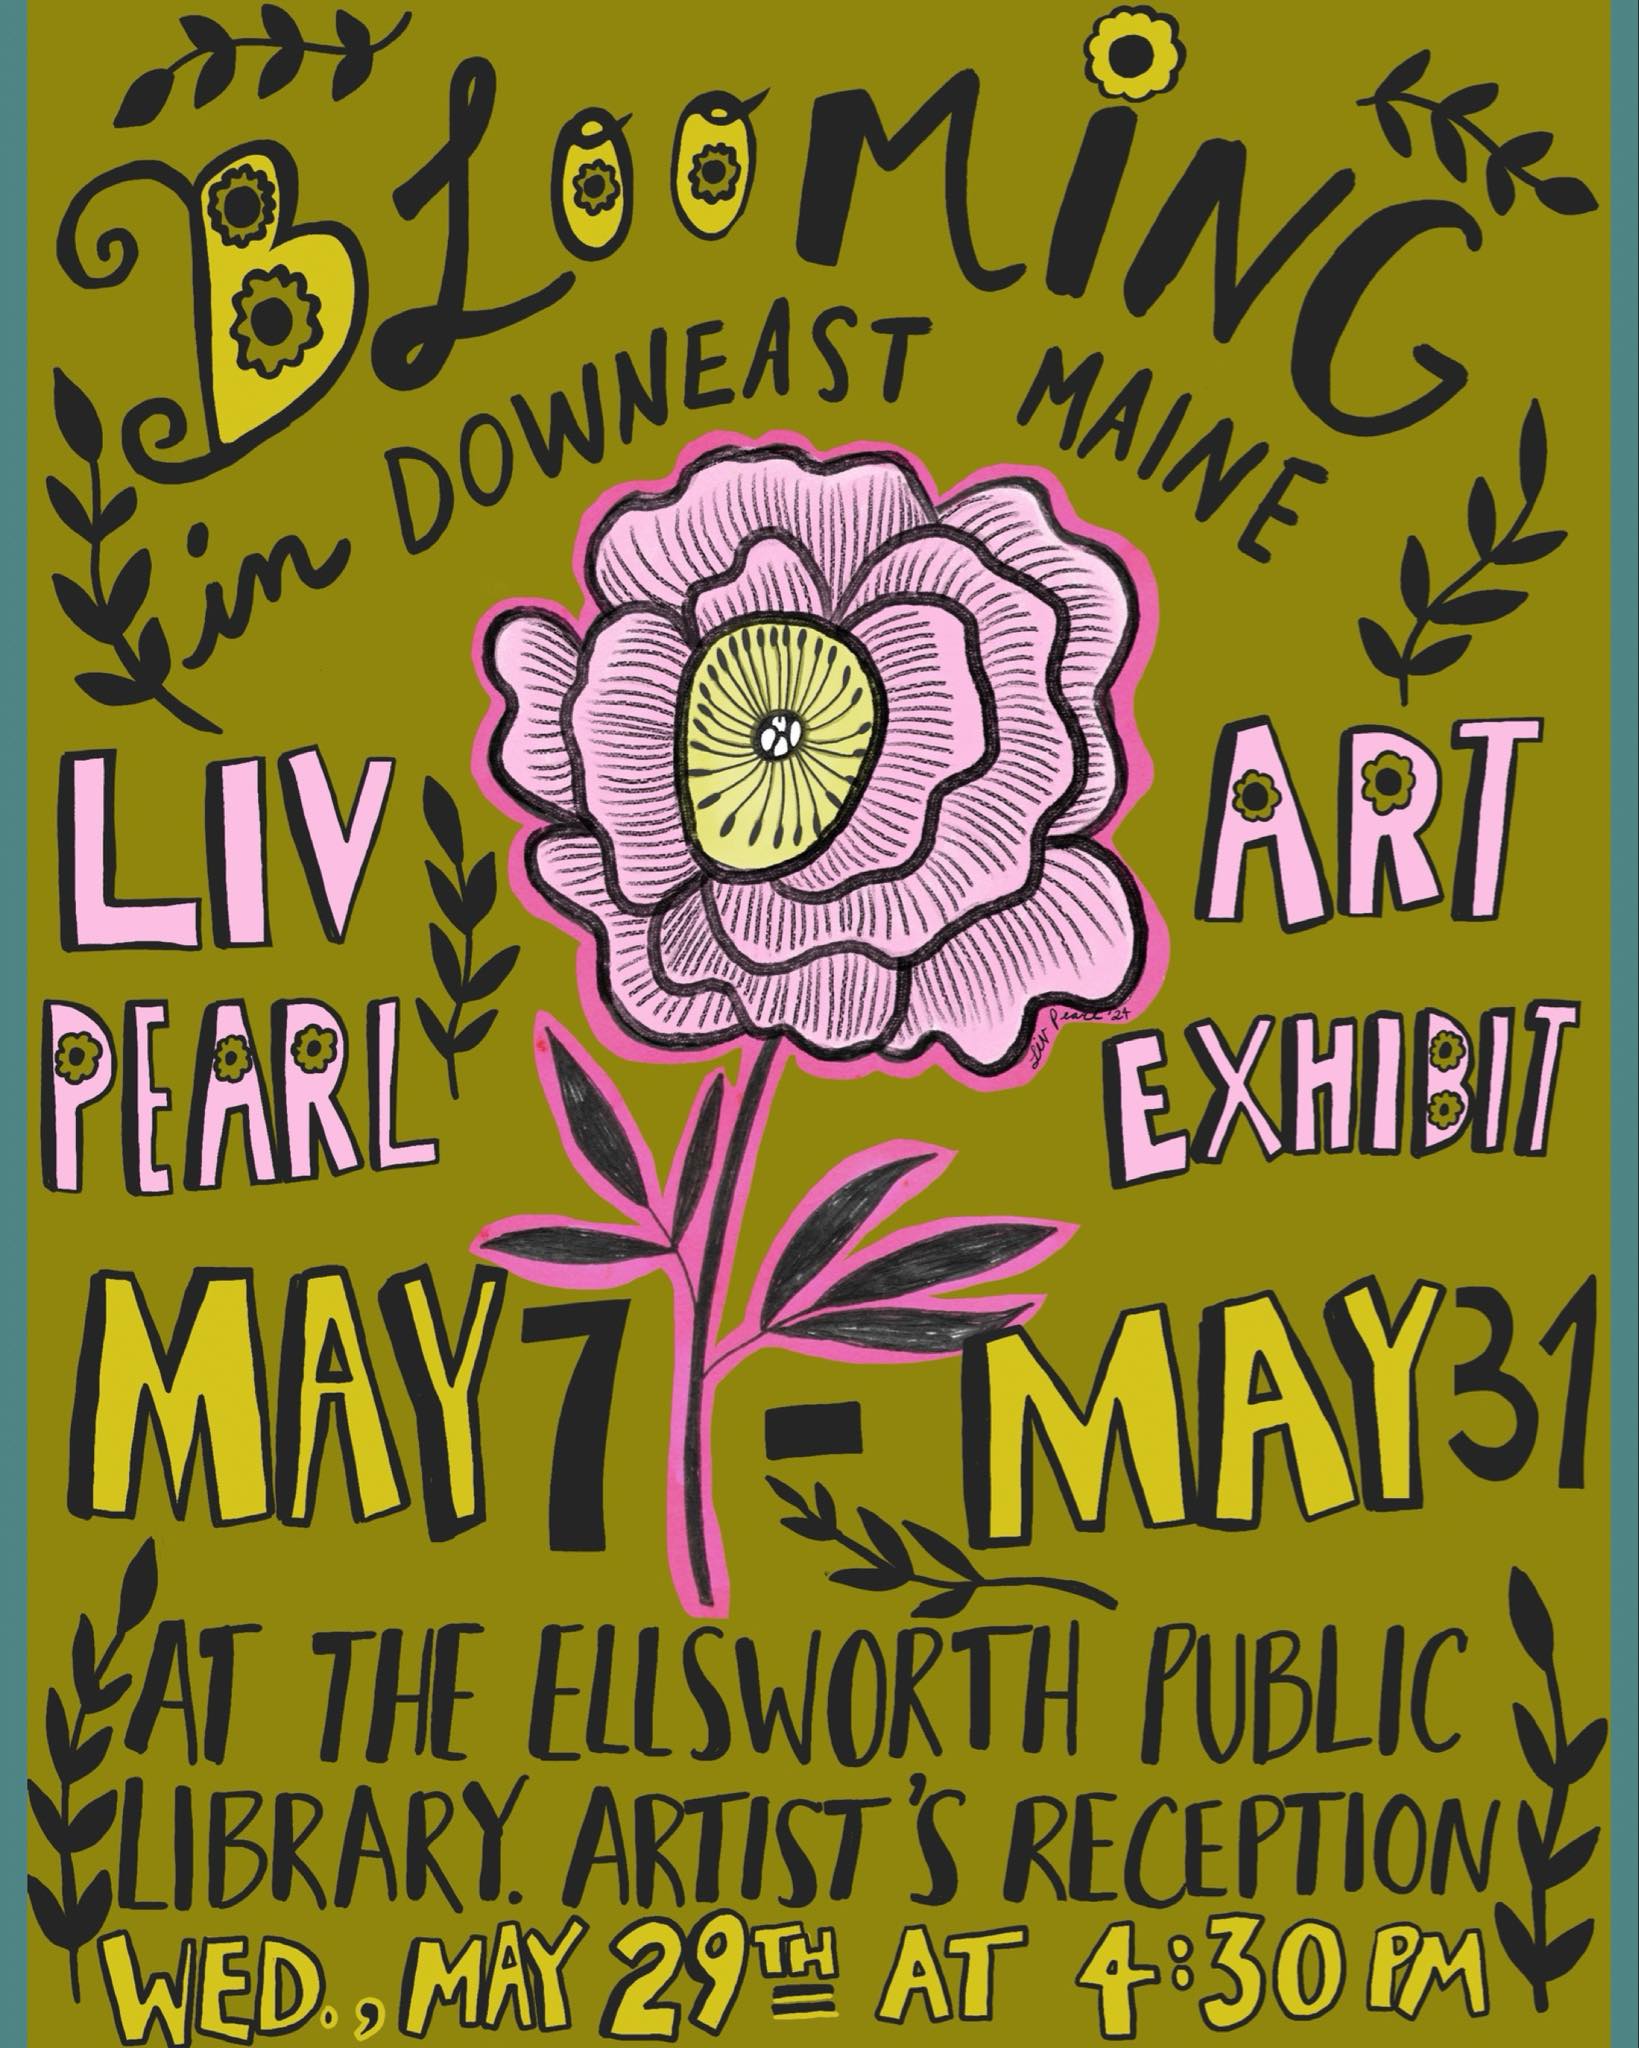 May Art Exhibit “Blooming in Downeast Maine” by Liv Pearl